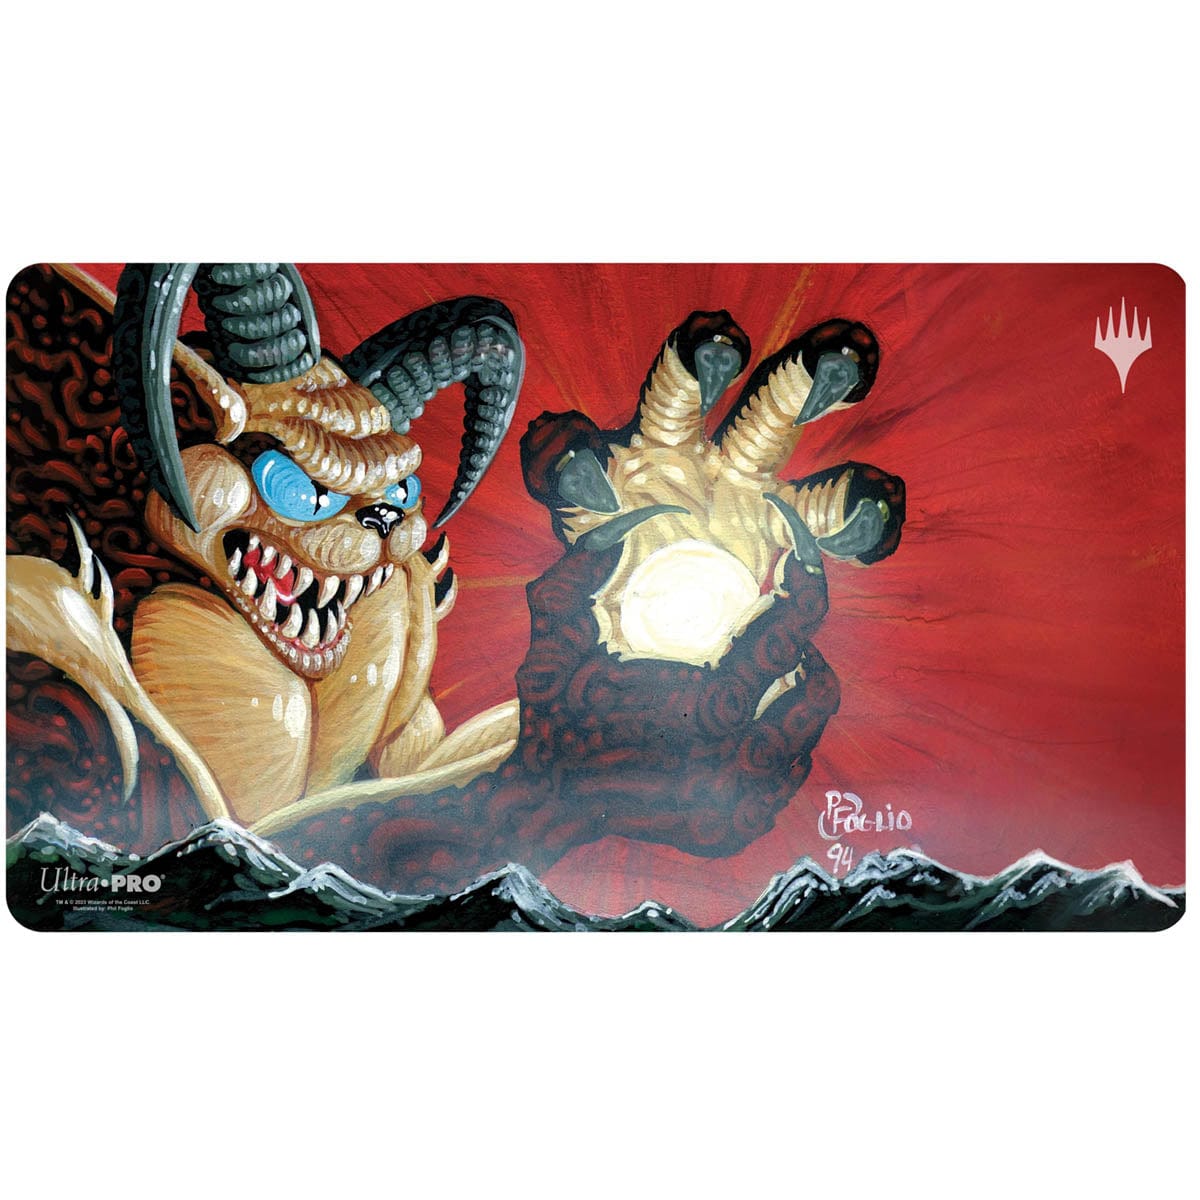 Infernal Darkness Playmat (Limited Edition)